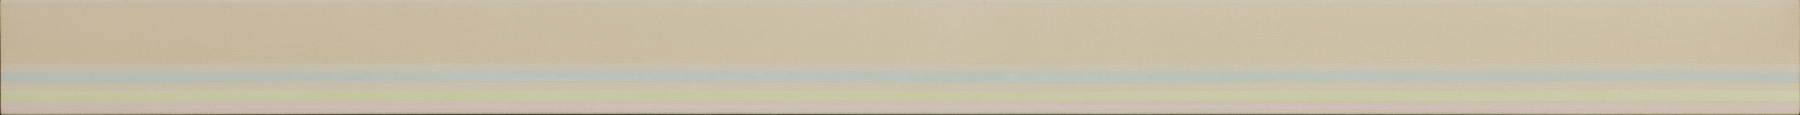 End Long

1969

Acrylic on canvas mounted on wood

6 x 96 inches

15.2 x 243.8cm